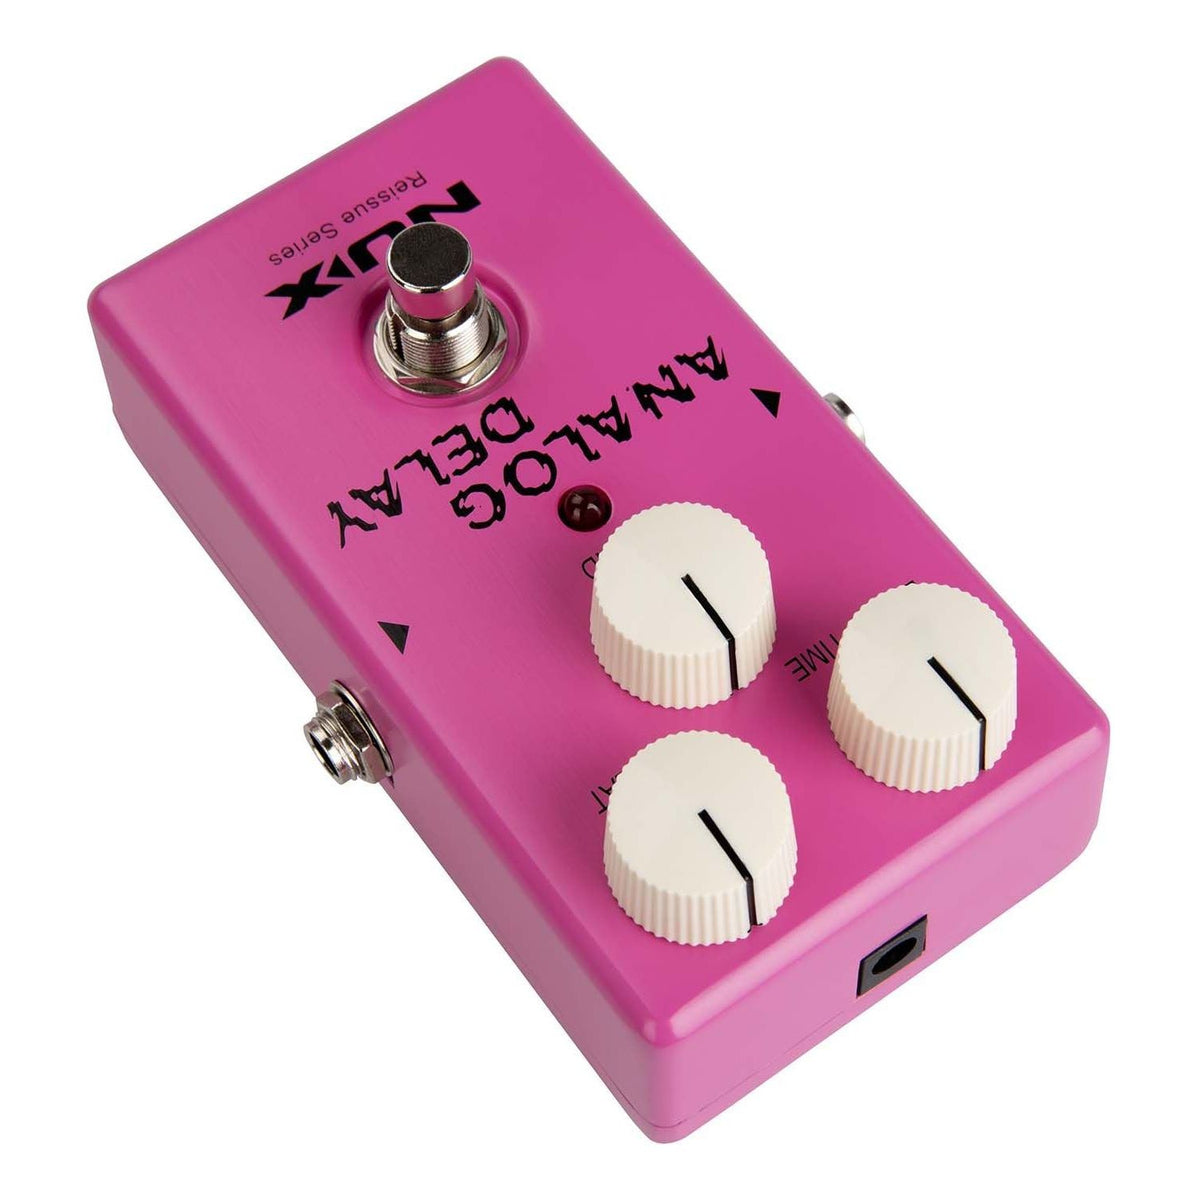 Nux Analog Delay Effect Pedal